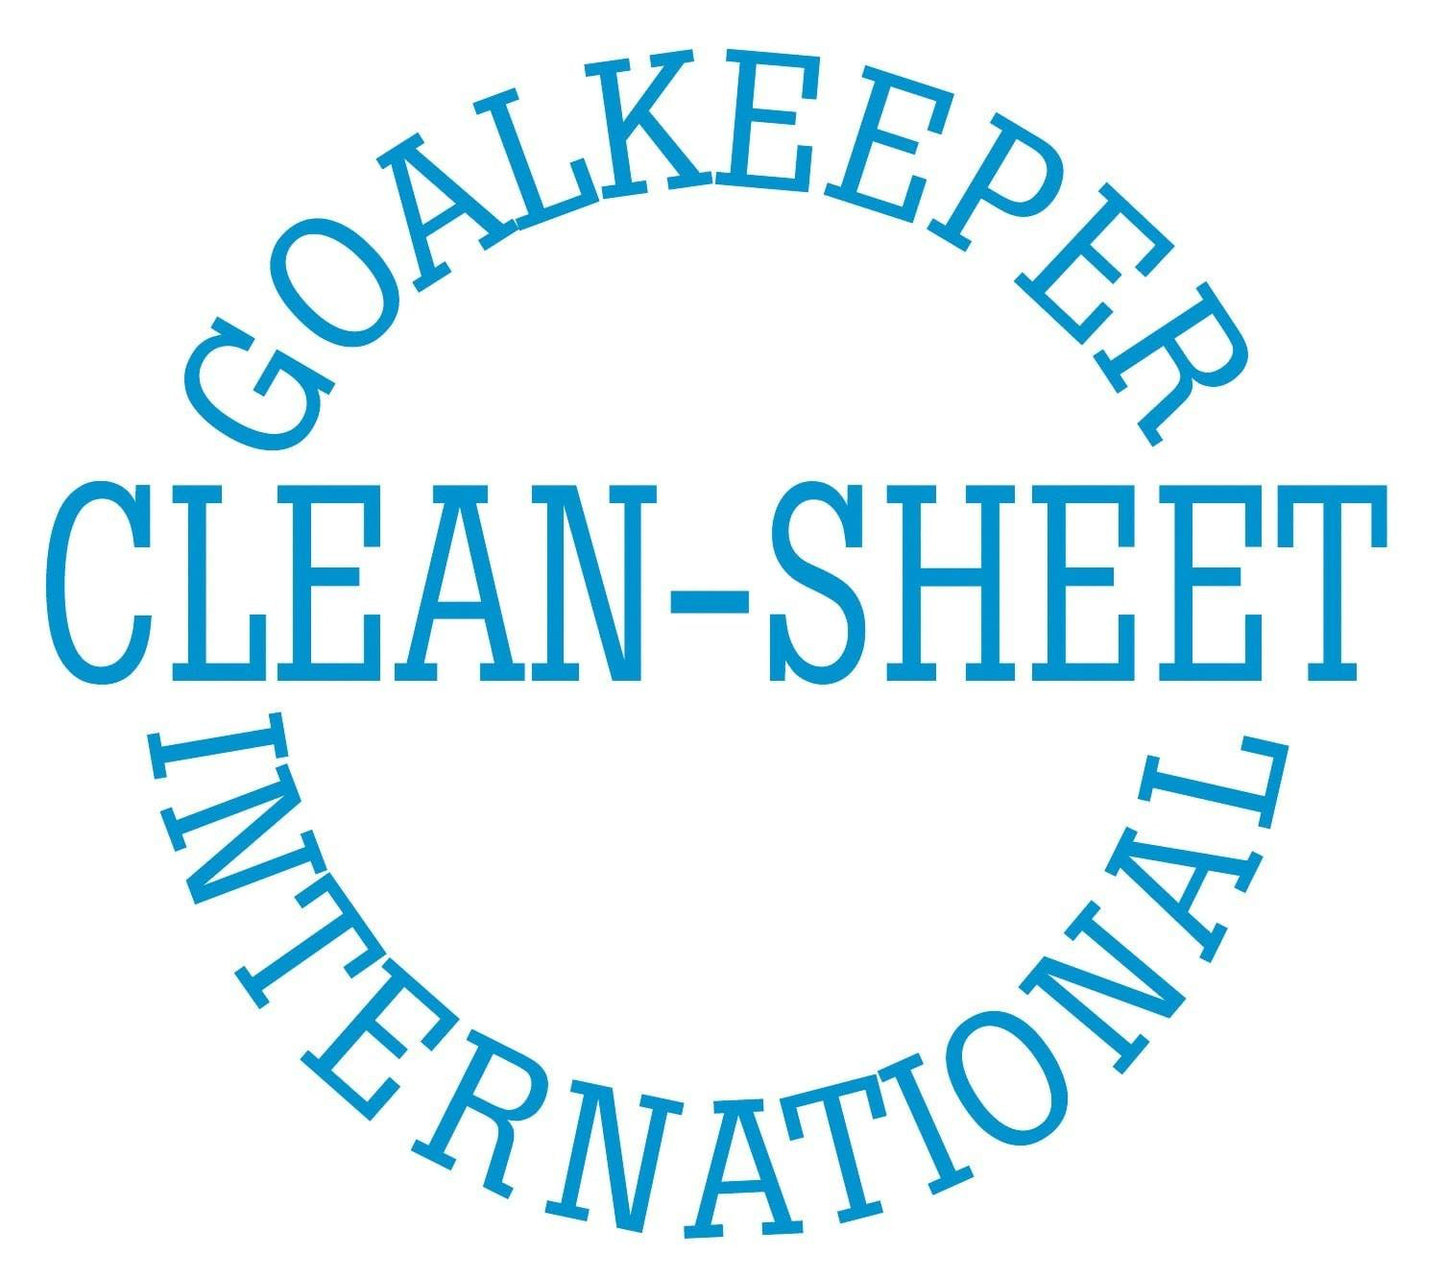 Clean Sheet International Sessions